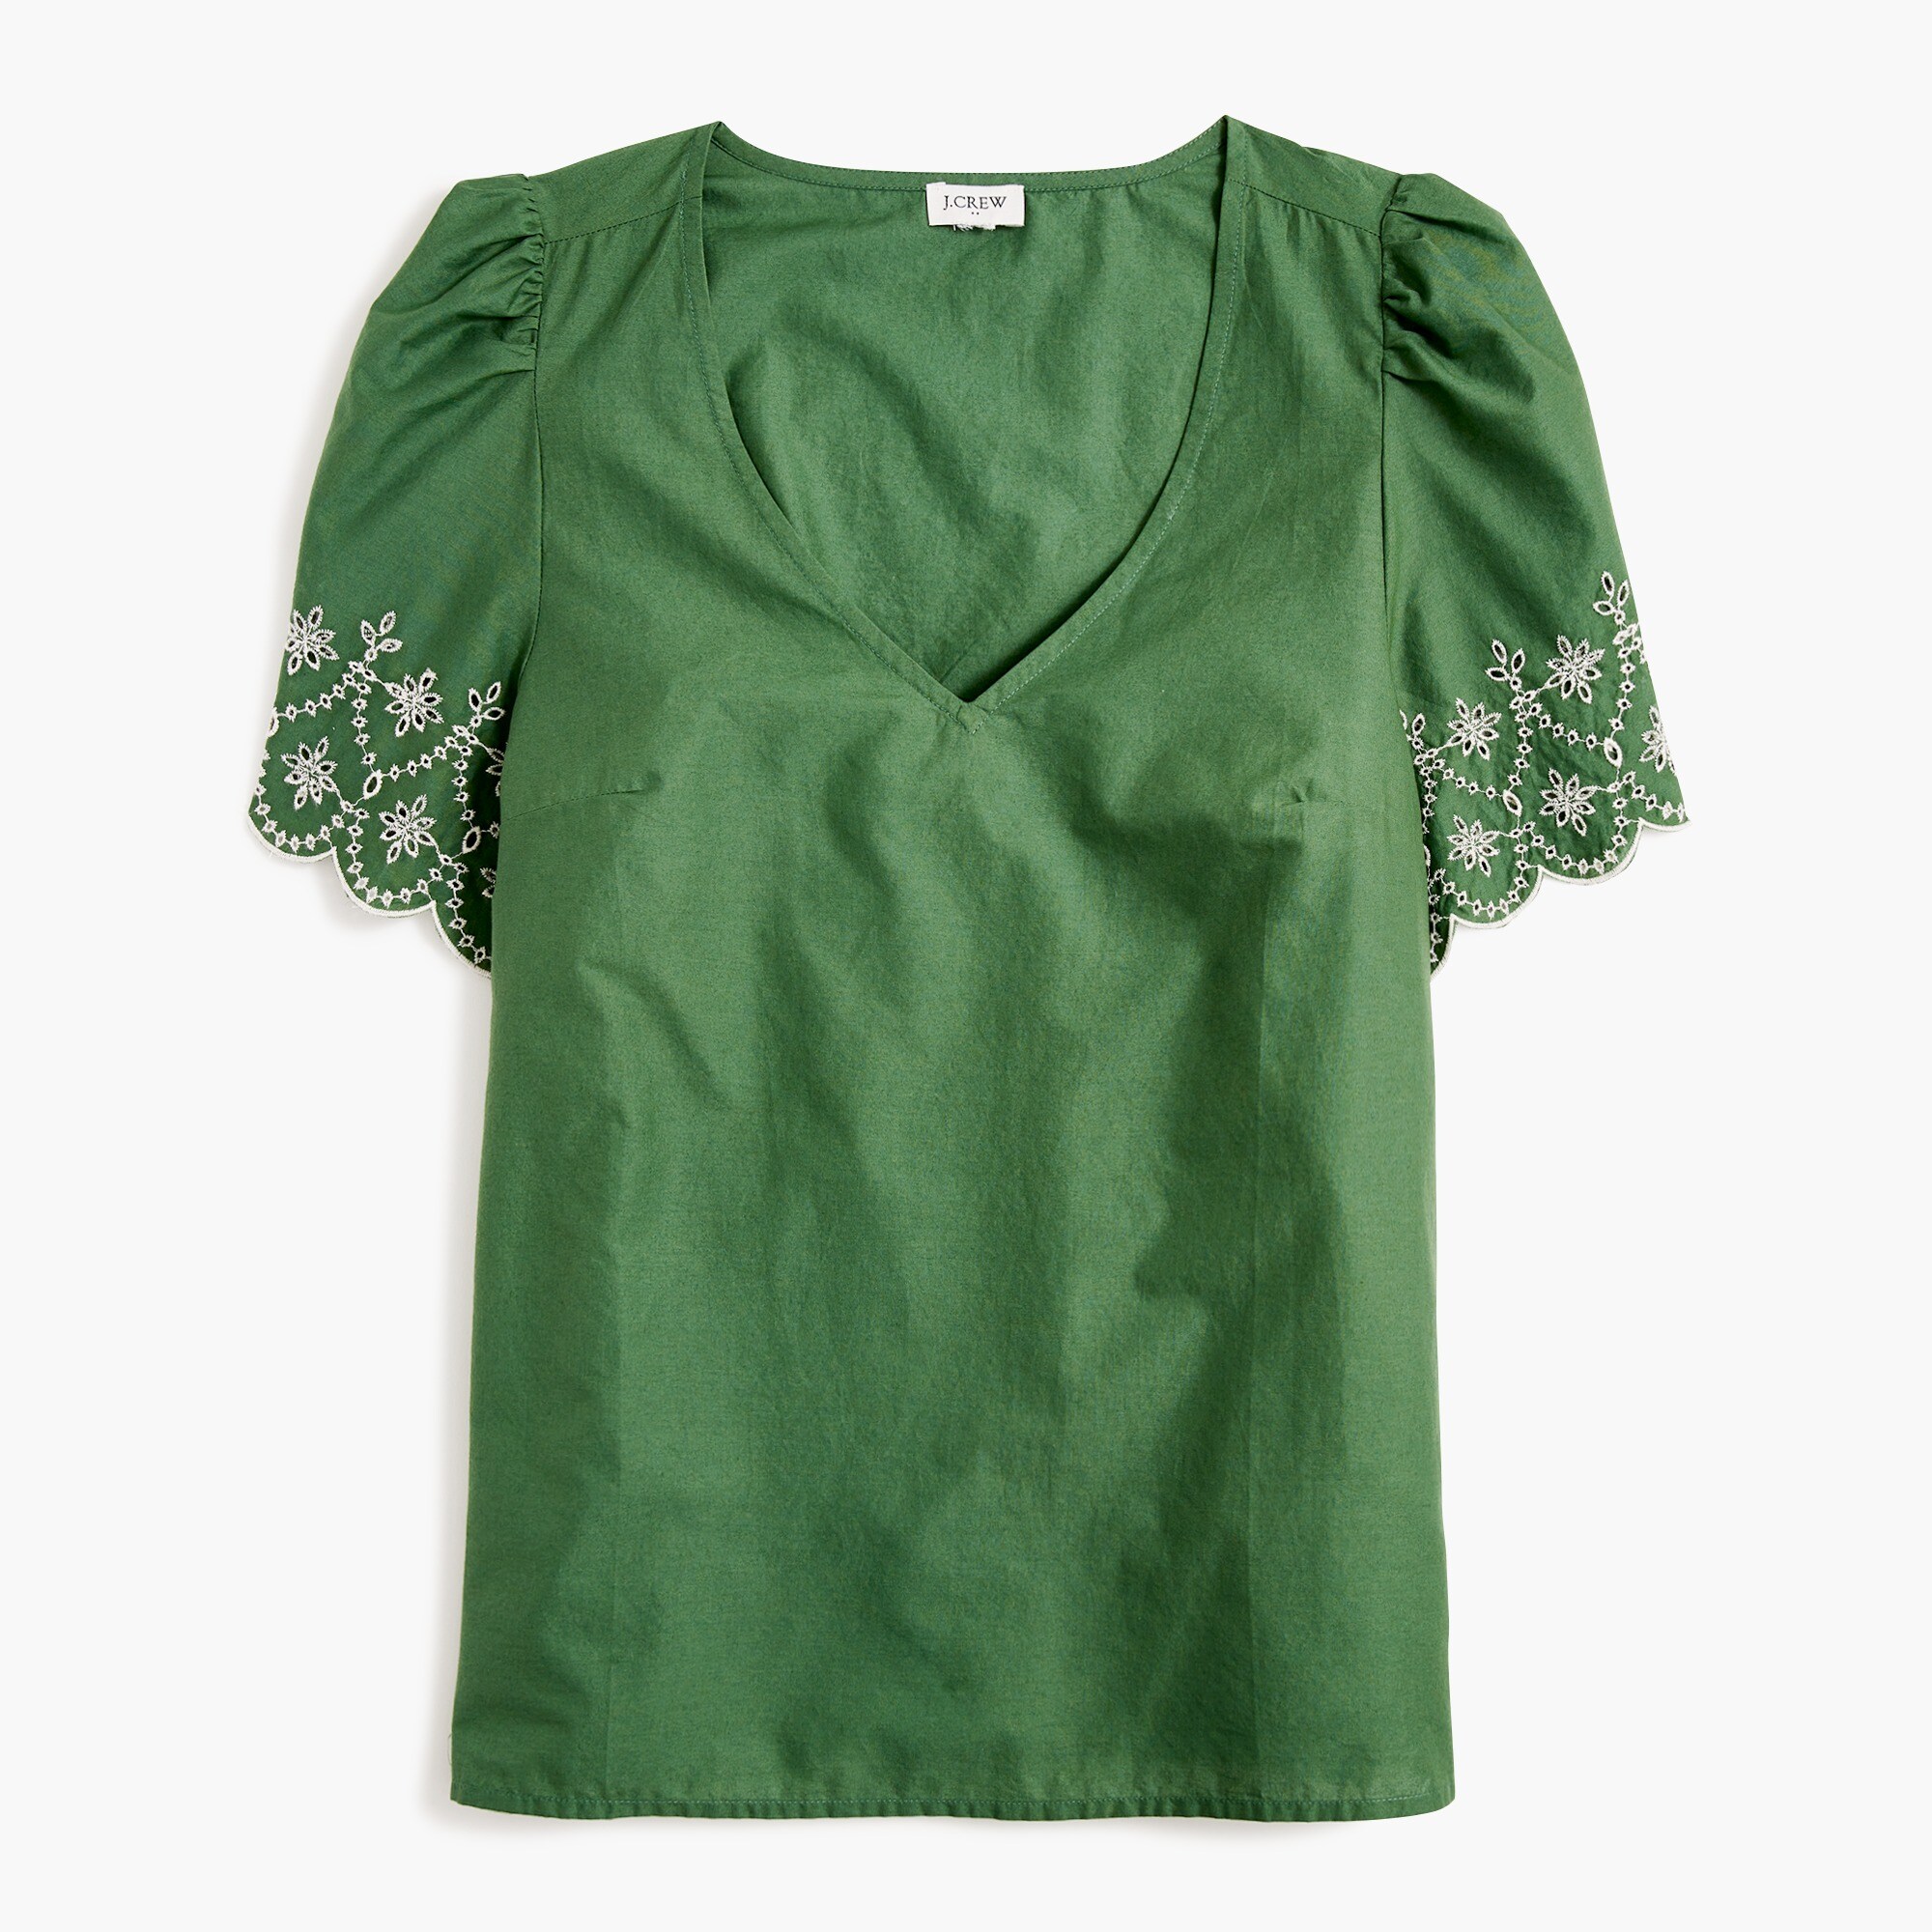  V-neck top with embroidered sleeves